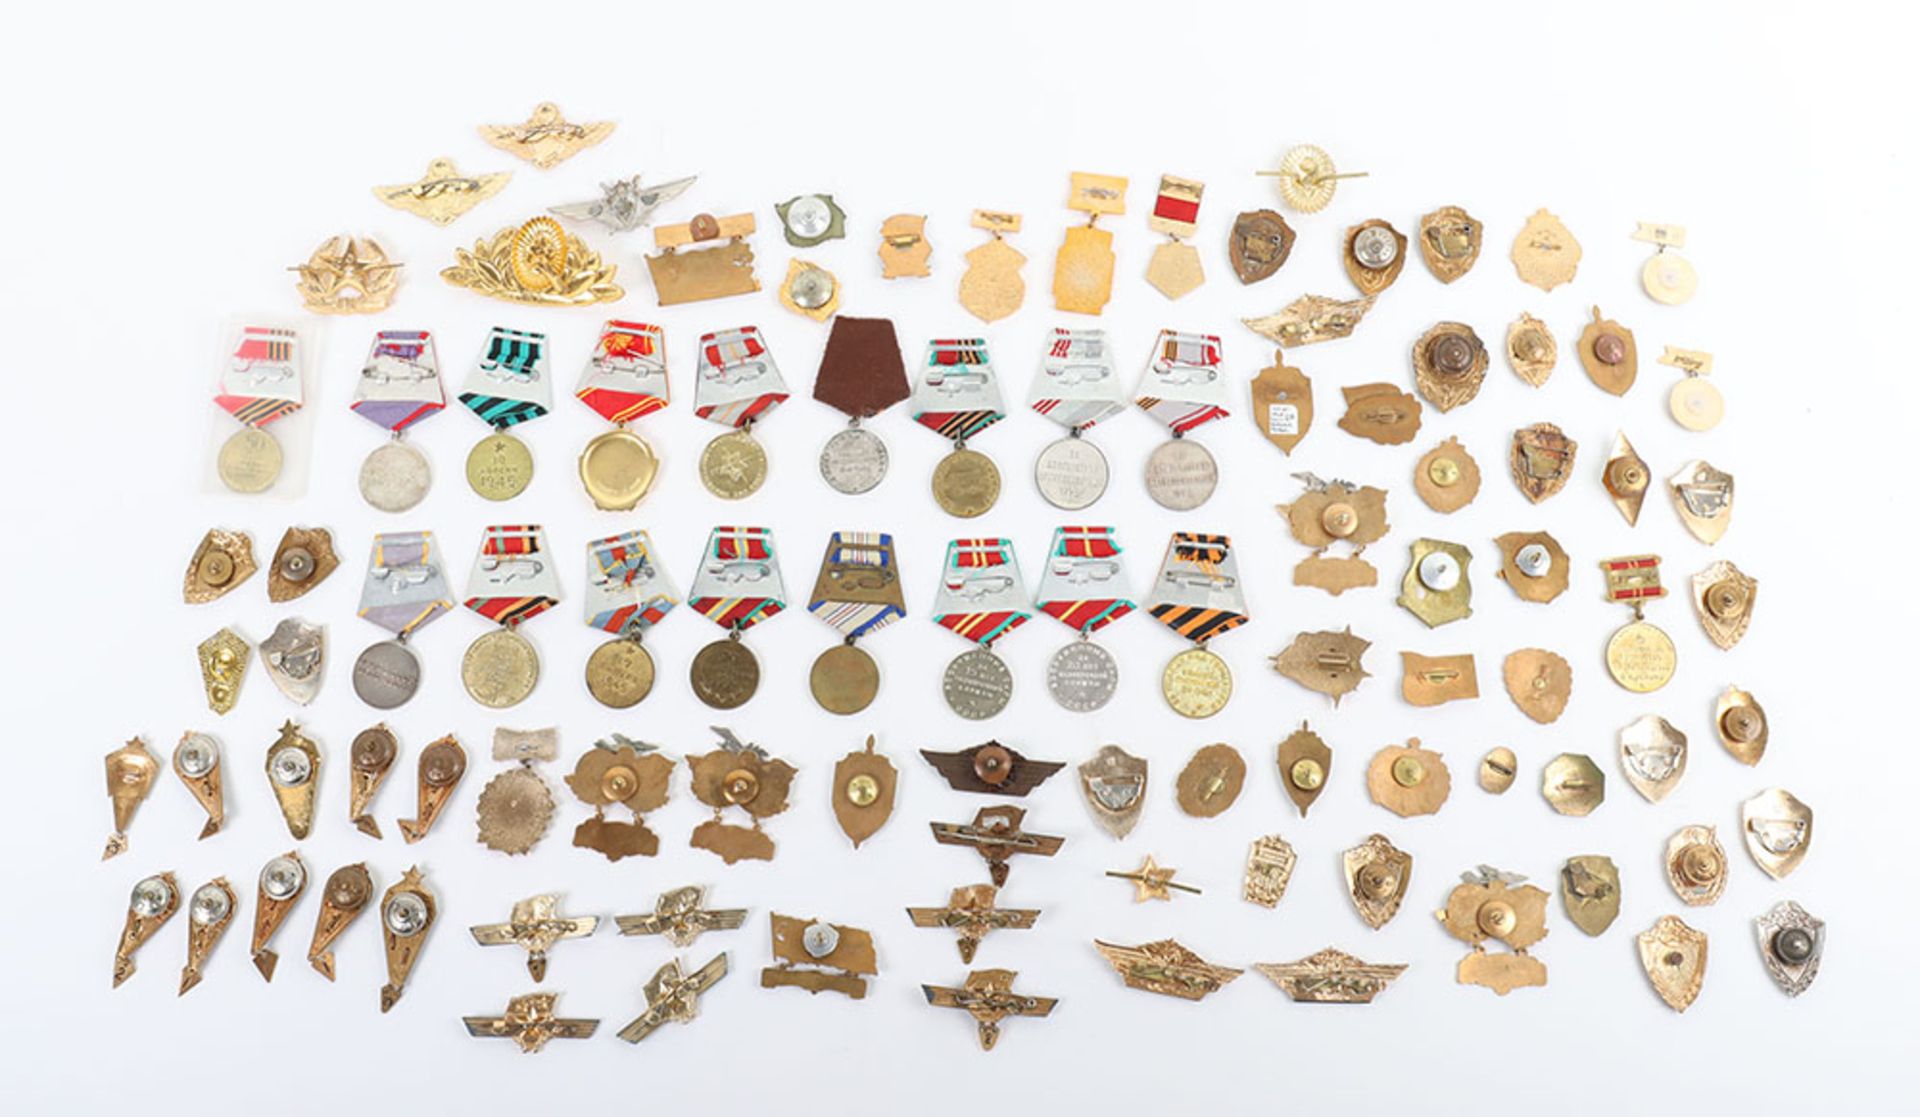 Large Quantity of Soviet Russian Medals and Badges - Image 2 of 2